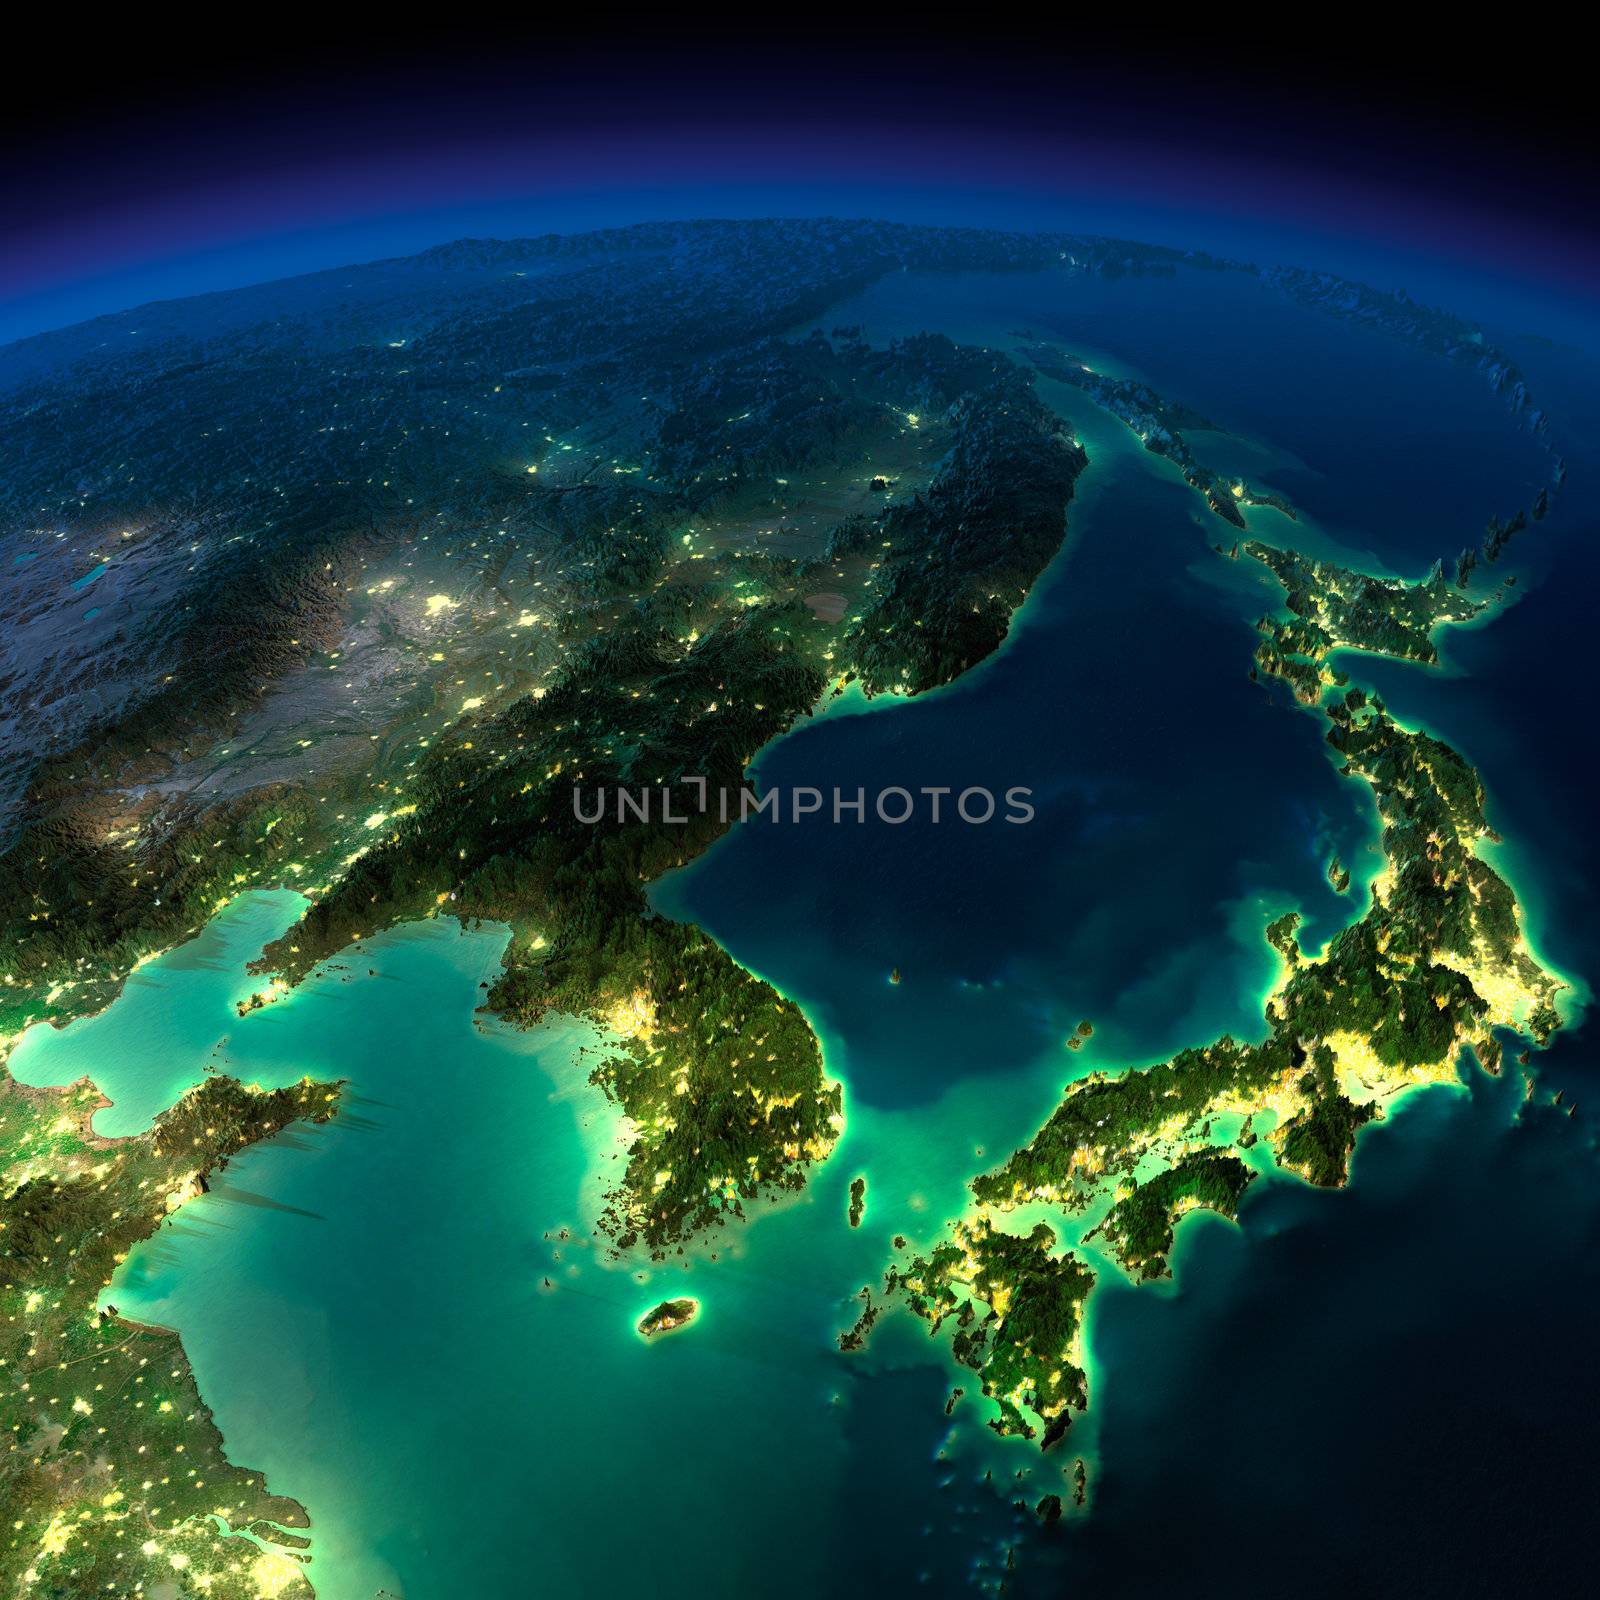 Night Earth. A piece of Asia -  Korea, Japan, China by Antartis